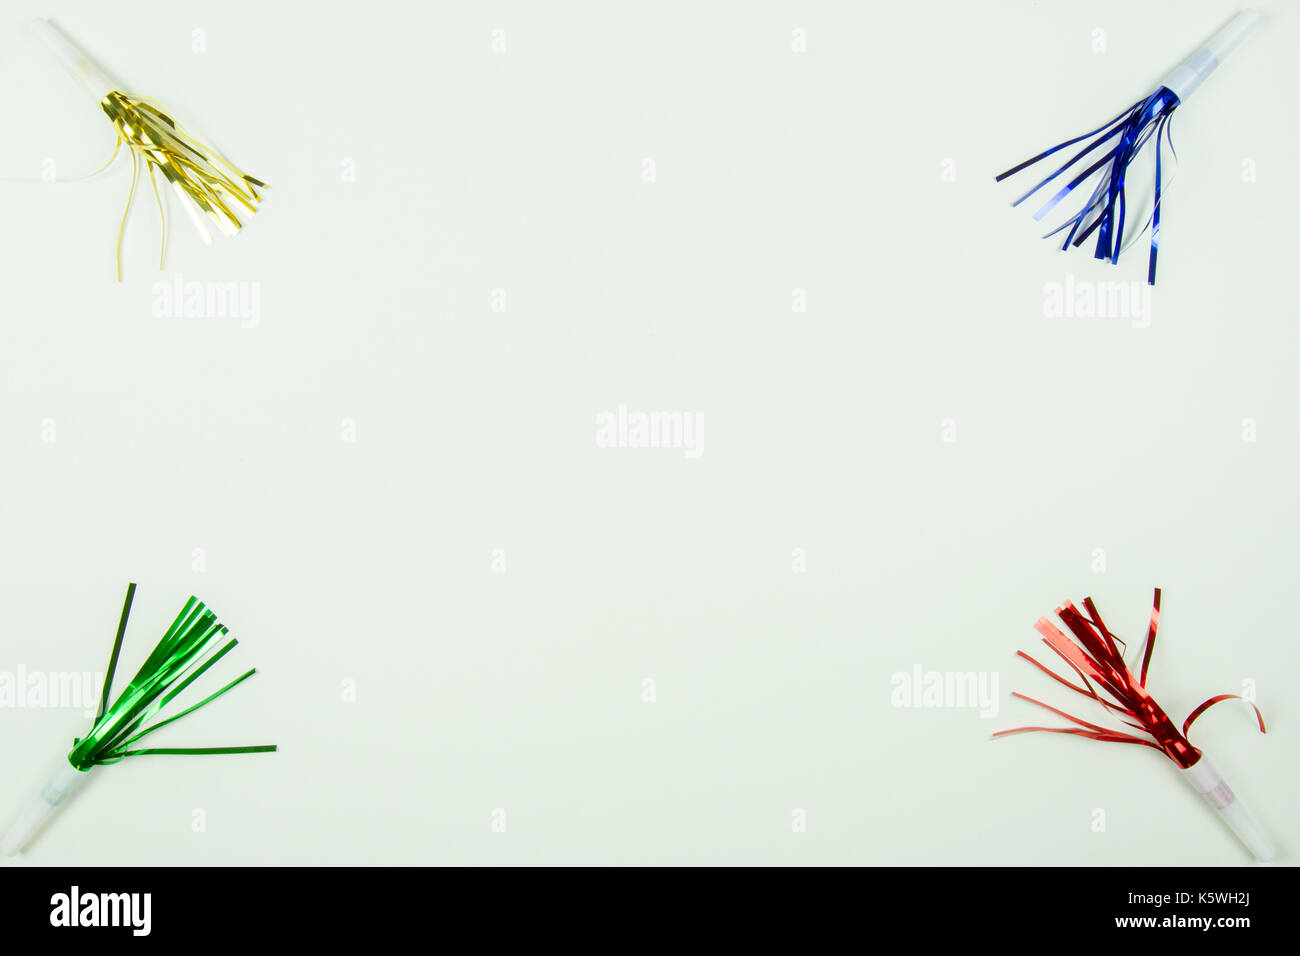 14,511 Red White Blue Streamers Images, Stock Photos, 3D objects, & Vectors